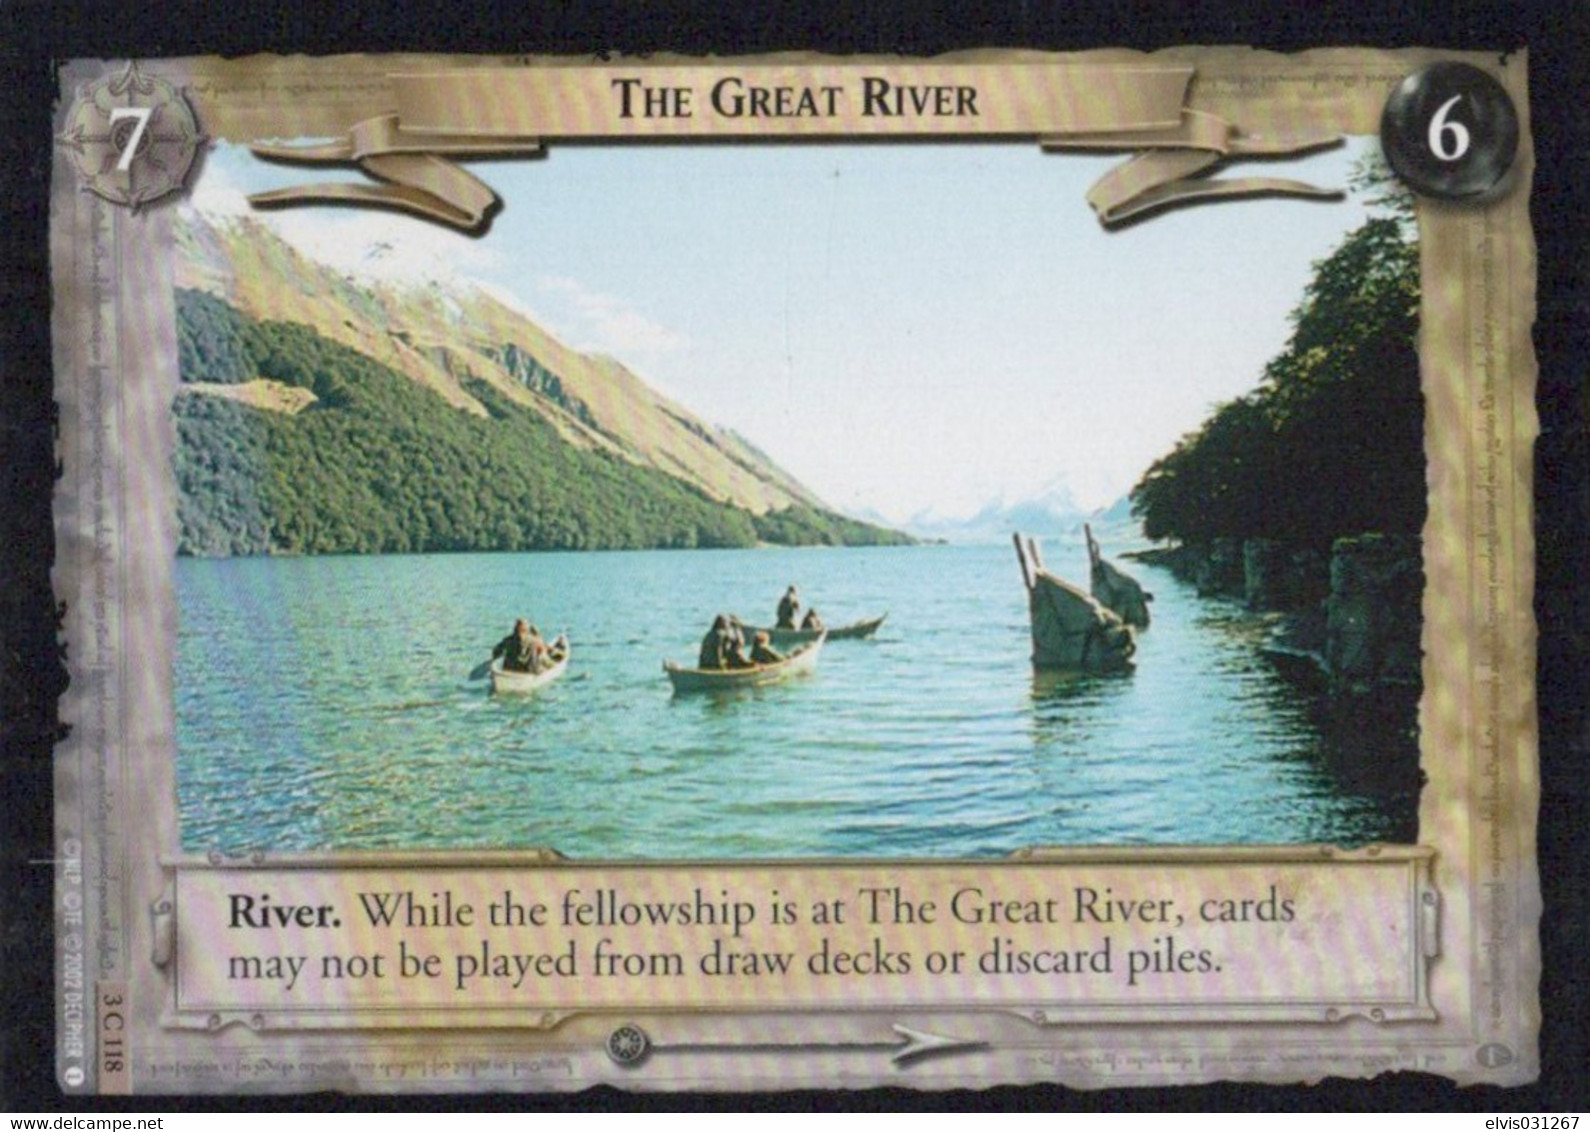 Vintage The Lord Of The Rings: #6-7 The Great River - EN - 2001-2004 - Mint Condition - Trading Card Game - Herr Der Ringe